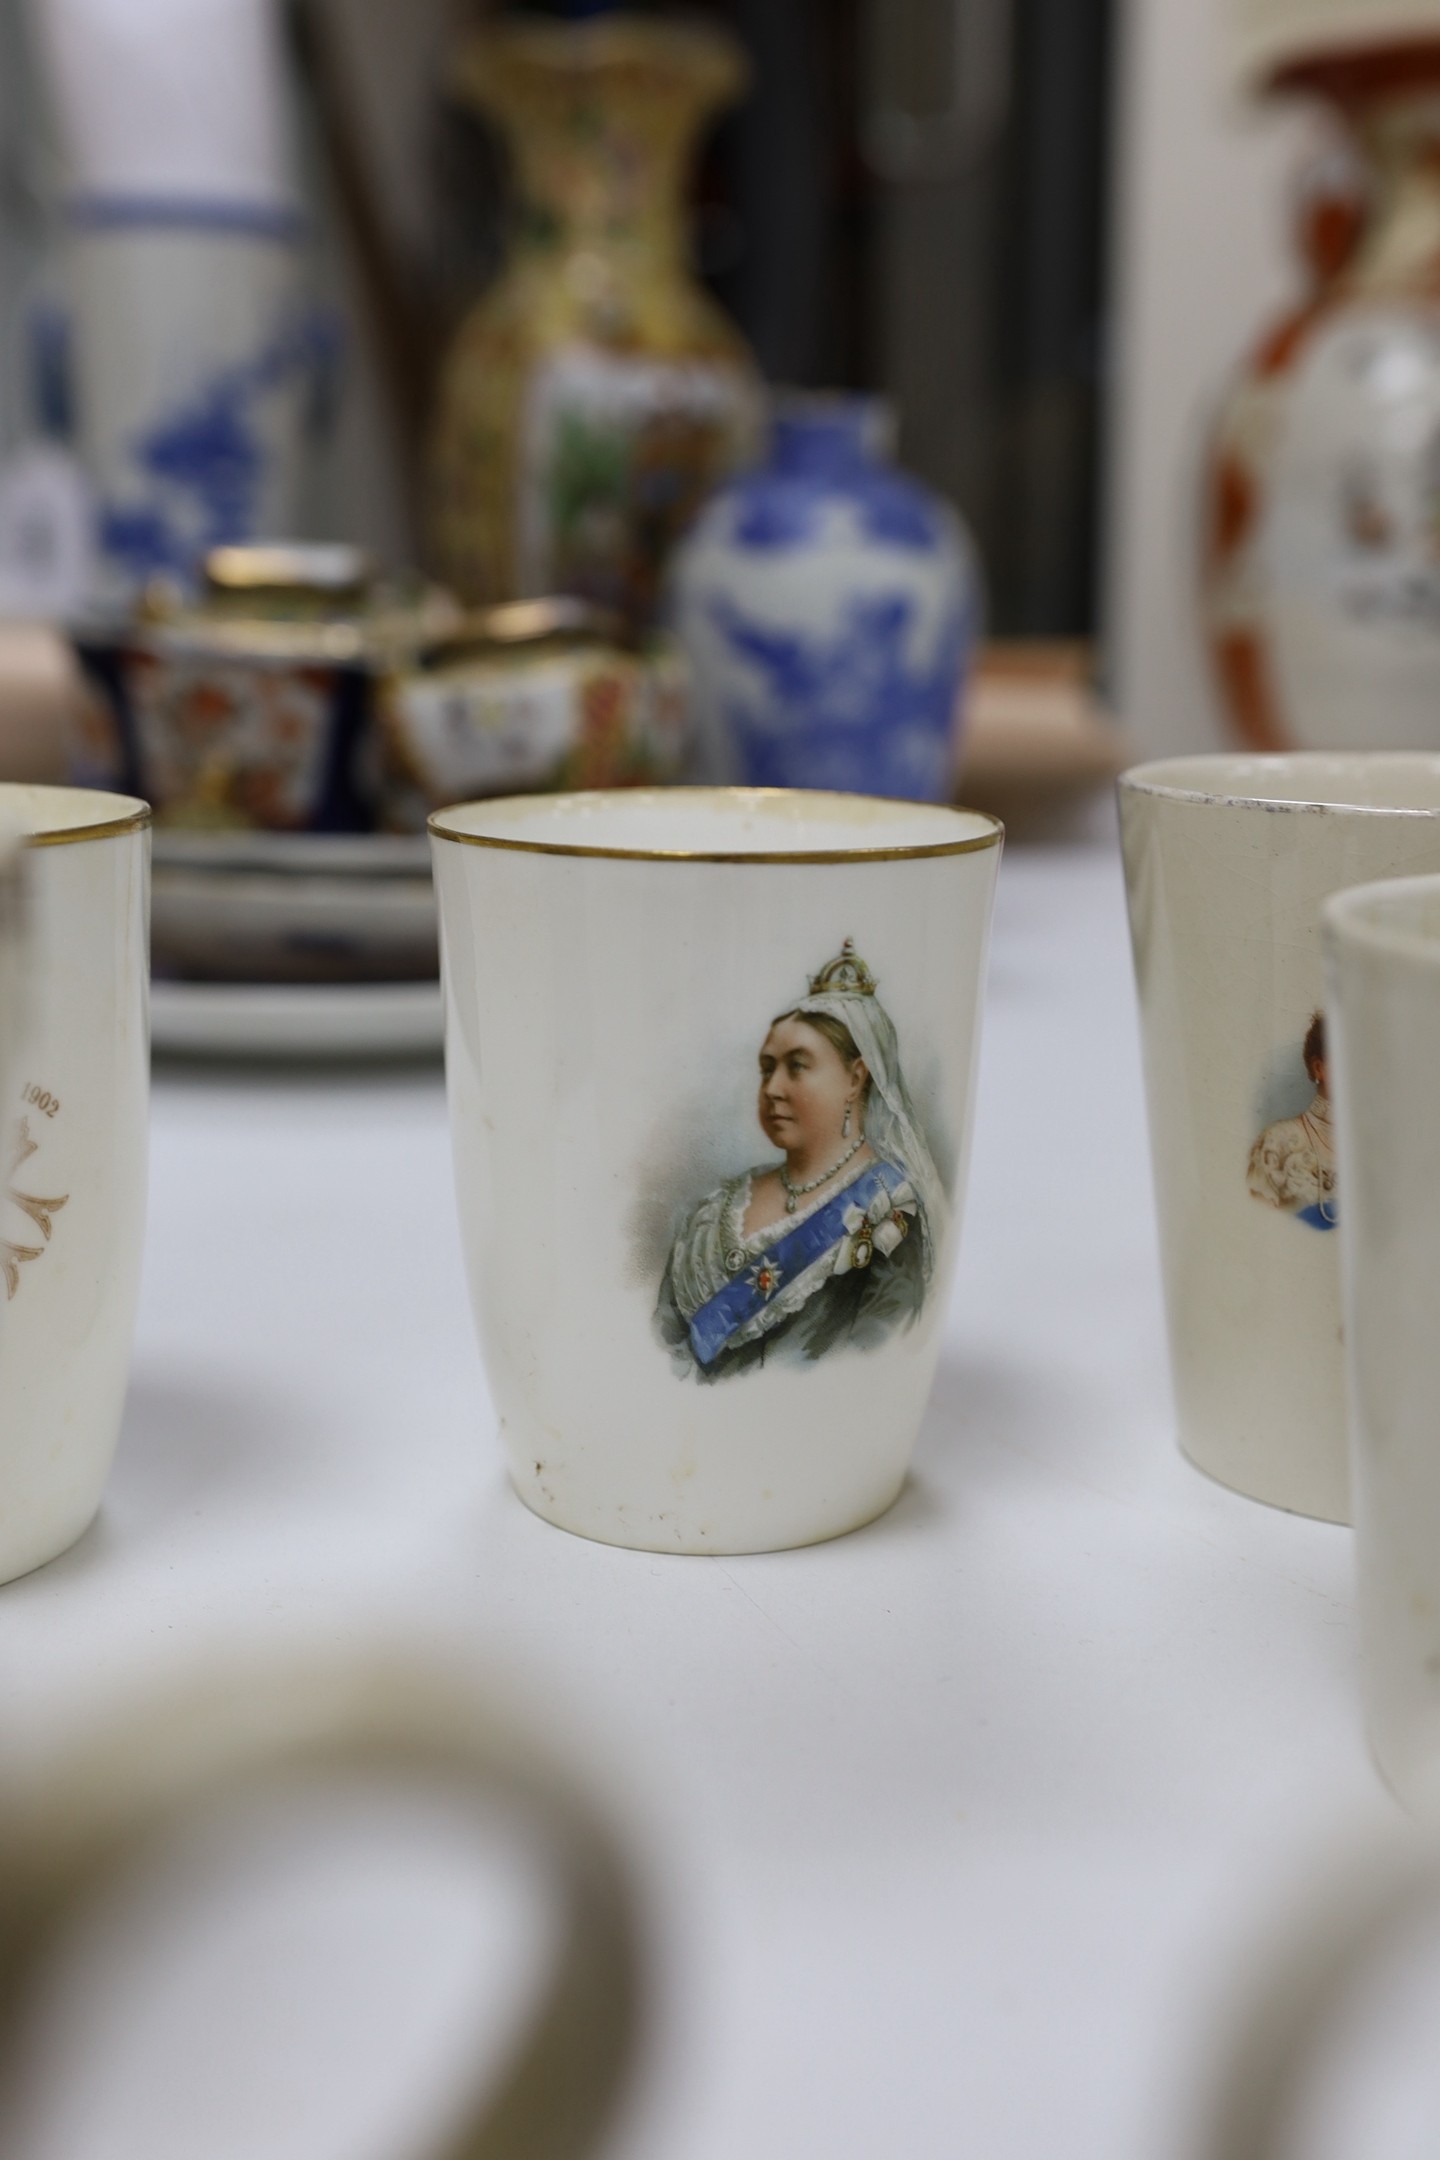 A collection of 19th/20th century commemorative ceramics including a Paragon QEII coronation commemorative Loving cup